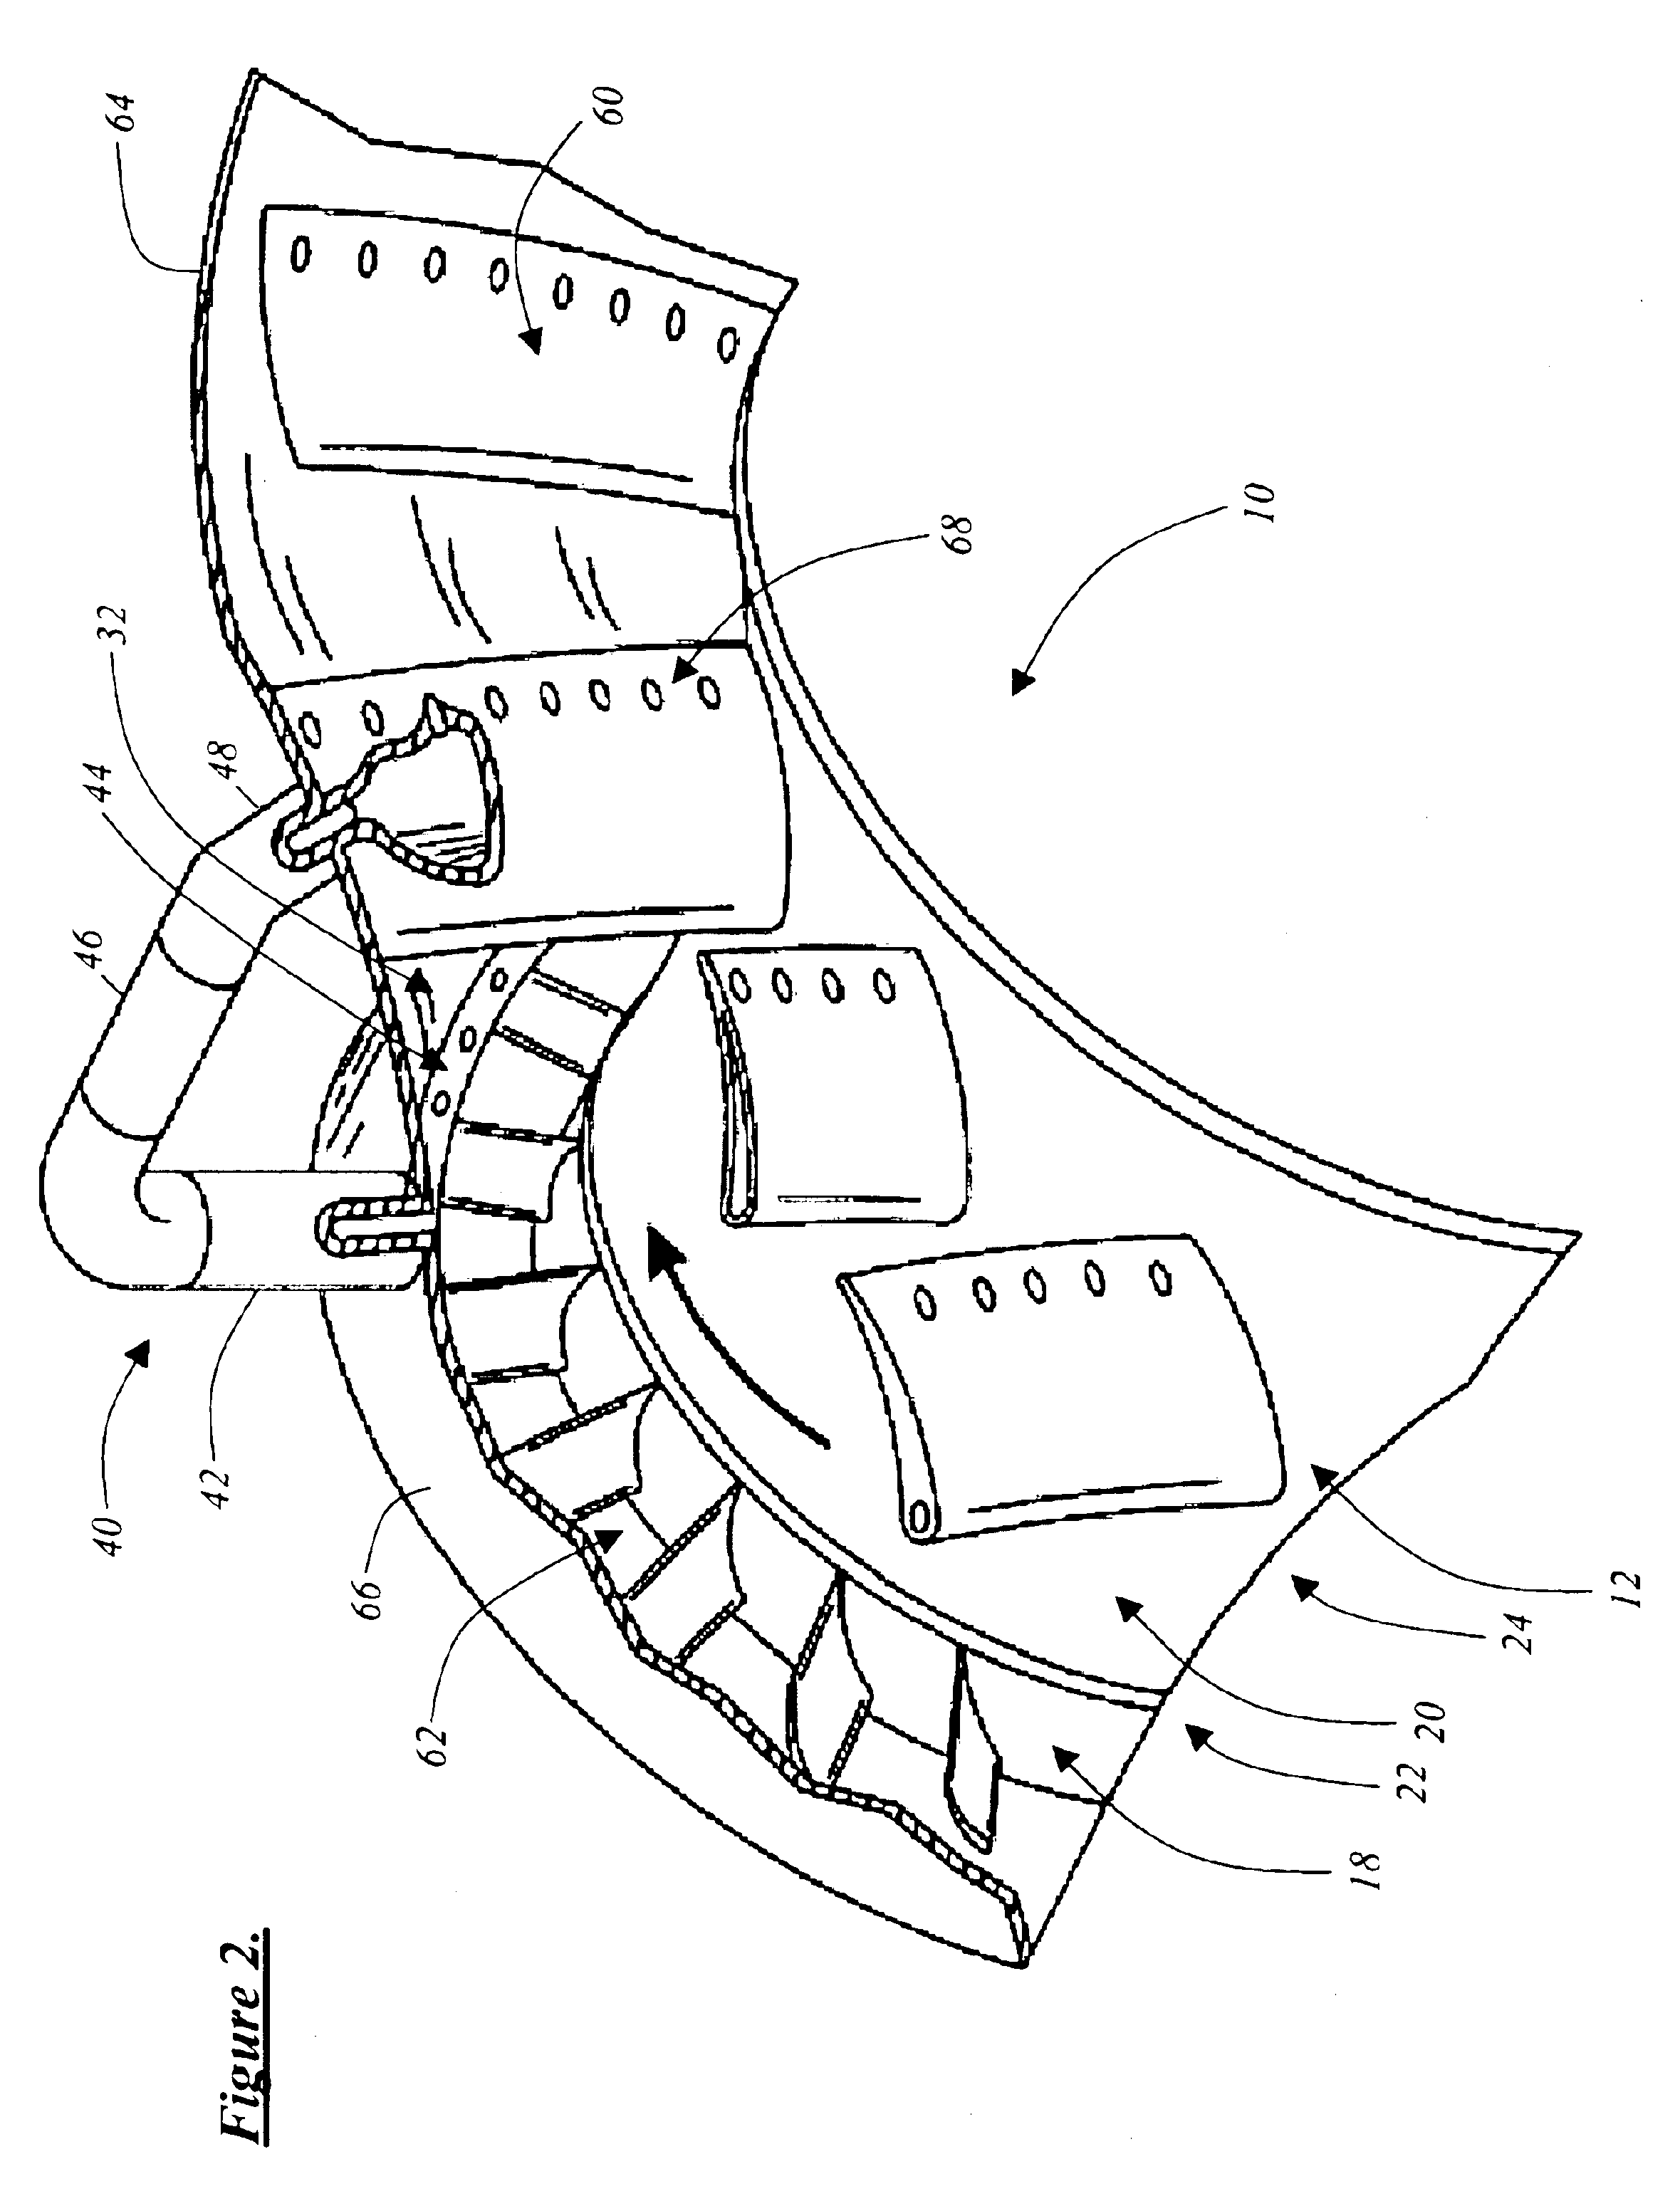 Self-aspirating high-area-ratio inter-turbine duct assembly for use in a gas turbine engine